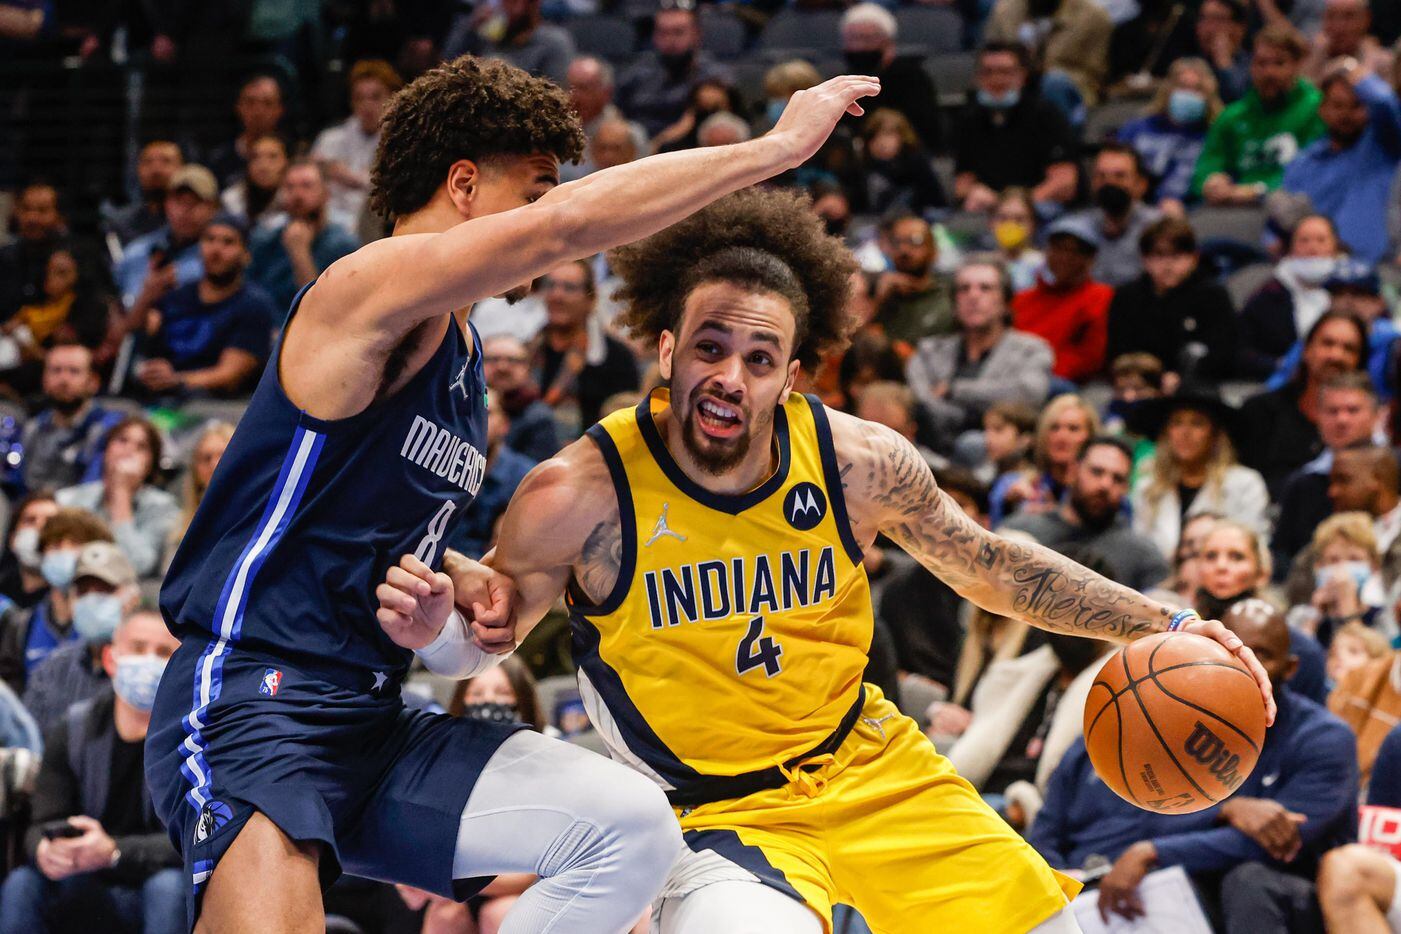 Indiana Pacers guard Duane Washington Jr. (4) protects the basketball against Dallas Mavericks forward George King (8) during a game at the American Airlines Center in Dallas on Saturday, January 29, 2022.